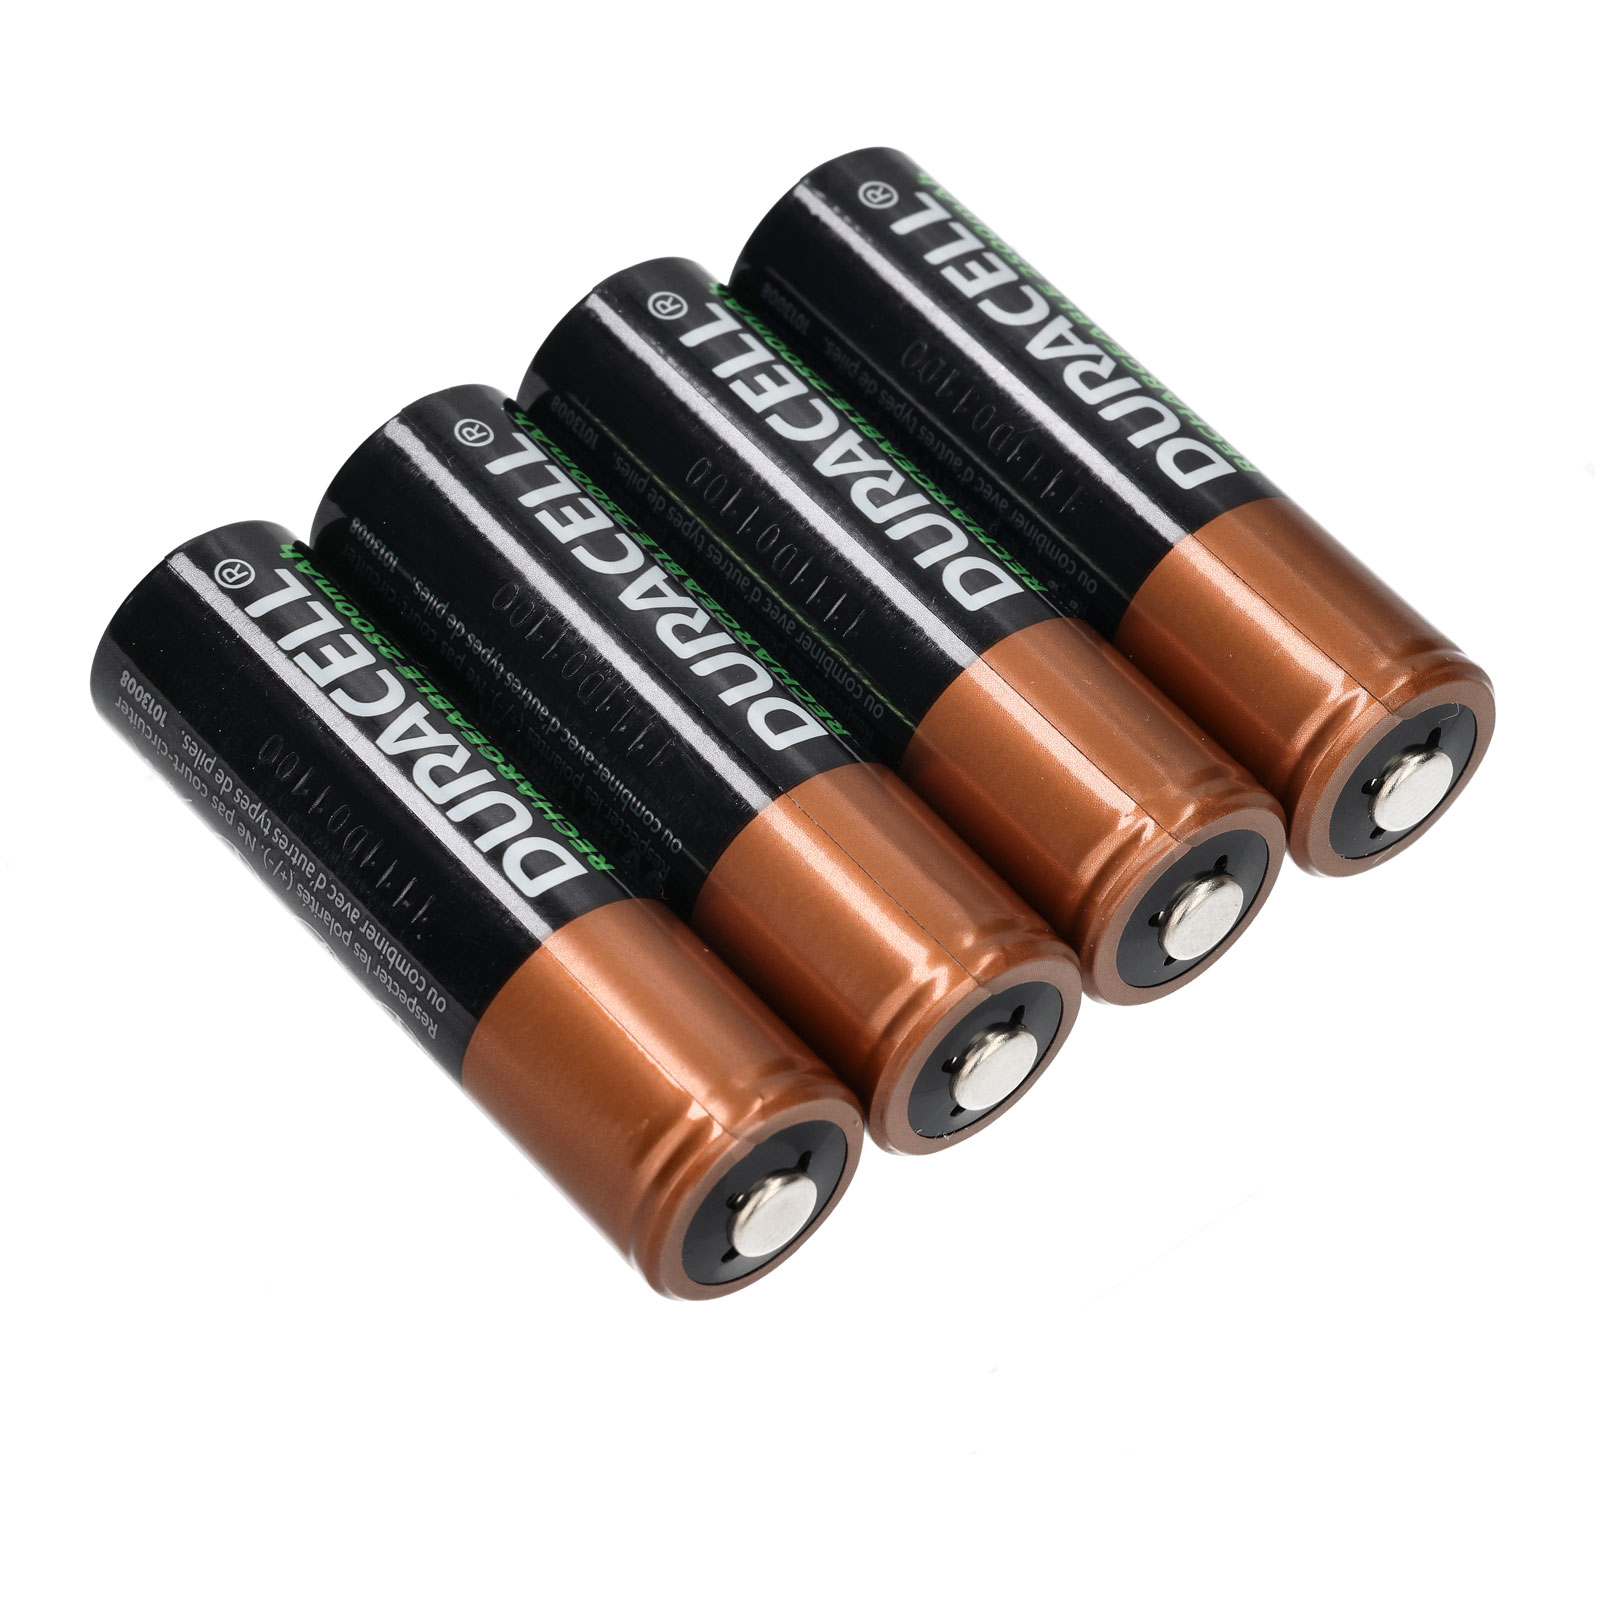 Duracell Battery Products